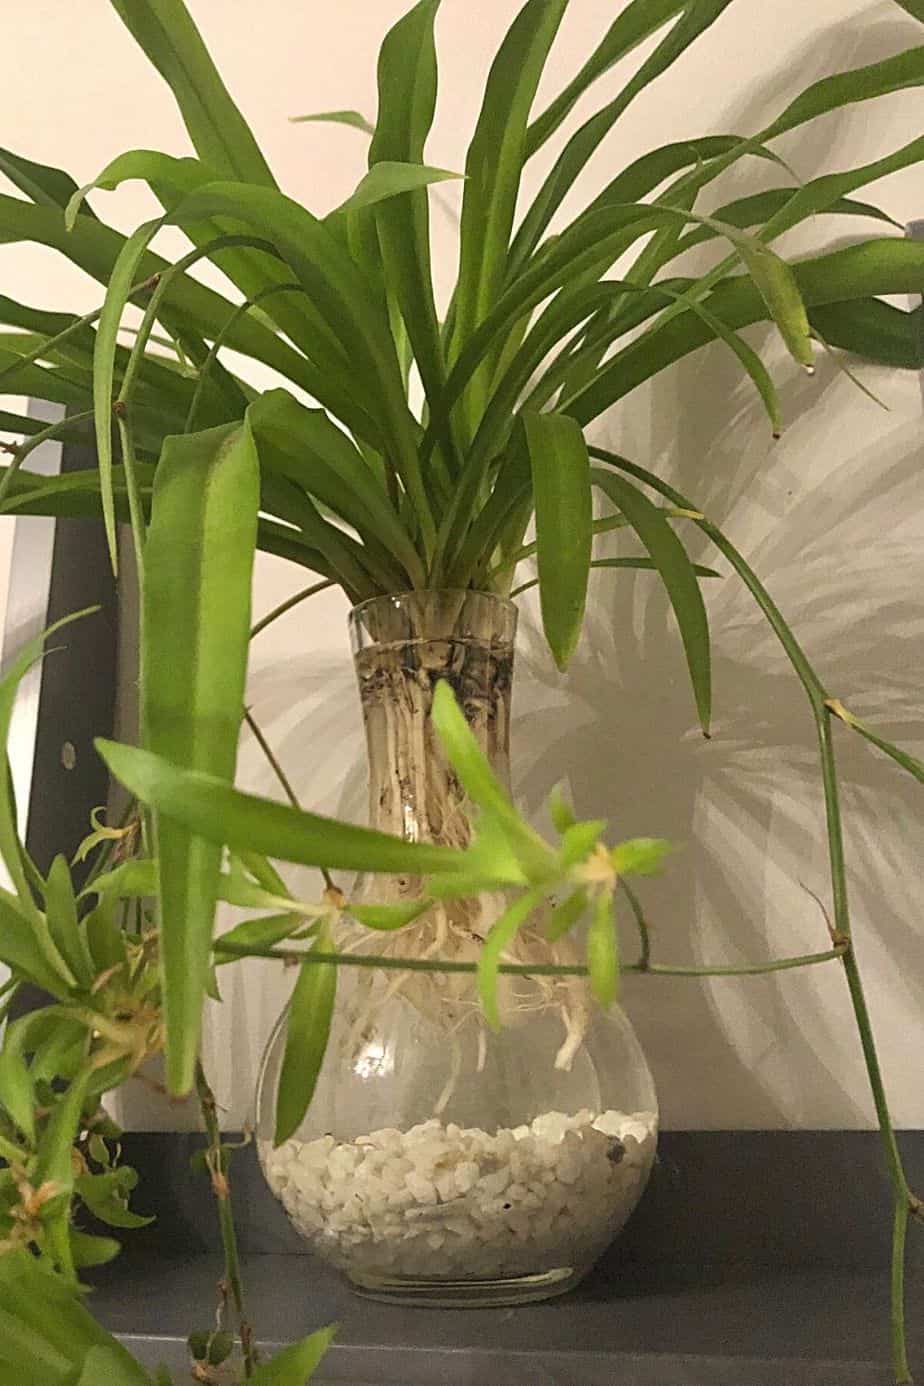 You can grow Spider Plant from cuttings, making sure to put them in a new pot once they root